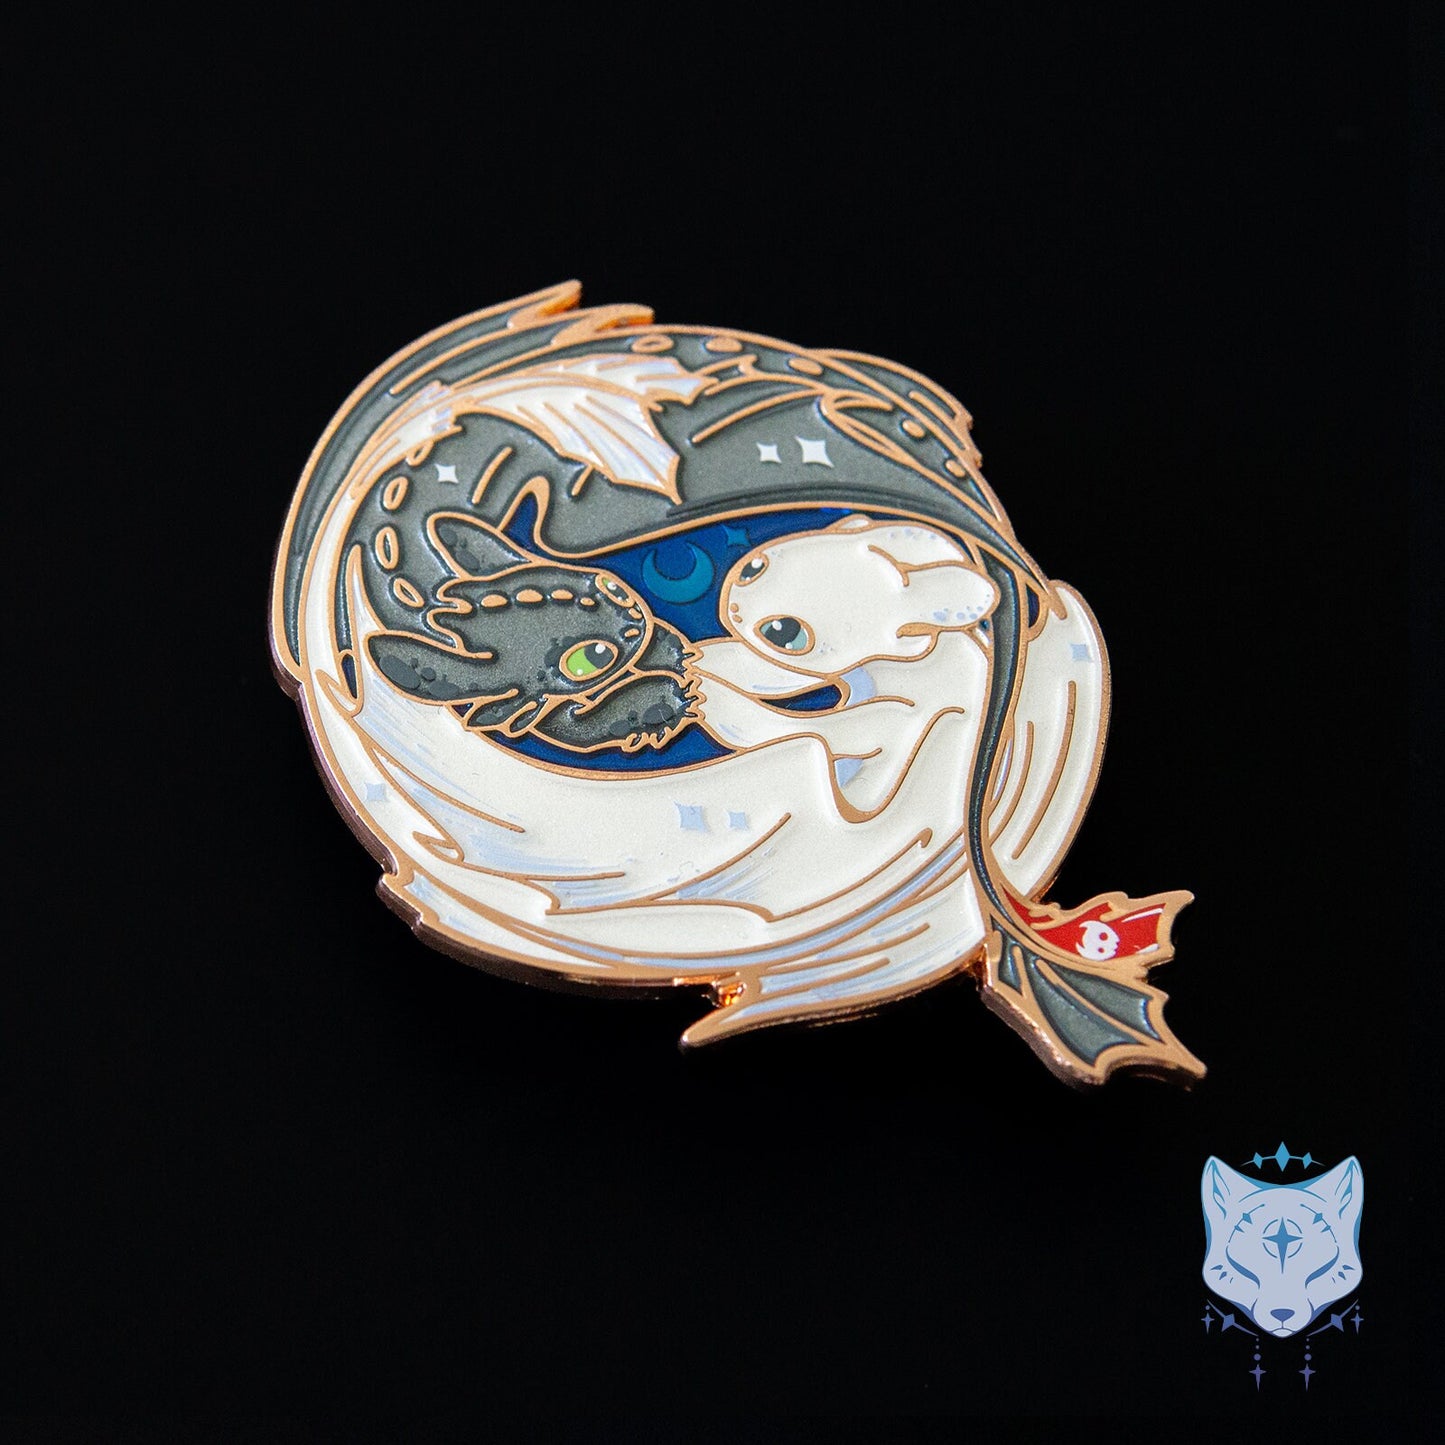 HTTYD "Flight of Dragons" - LE 55 Rose Gold Pearl 2.5" pin